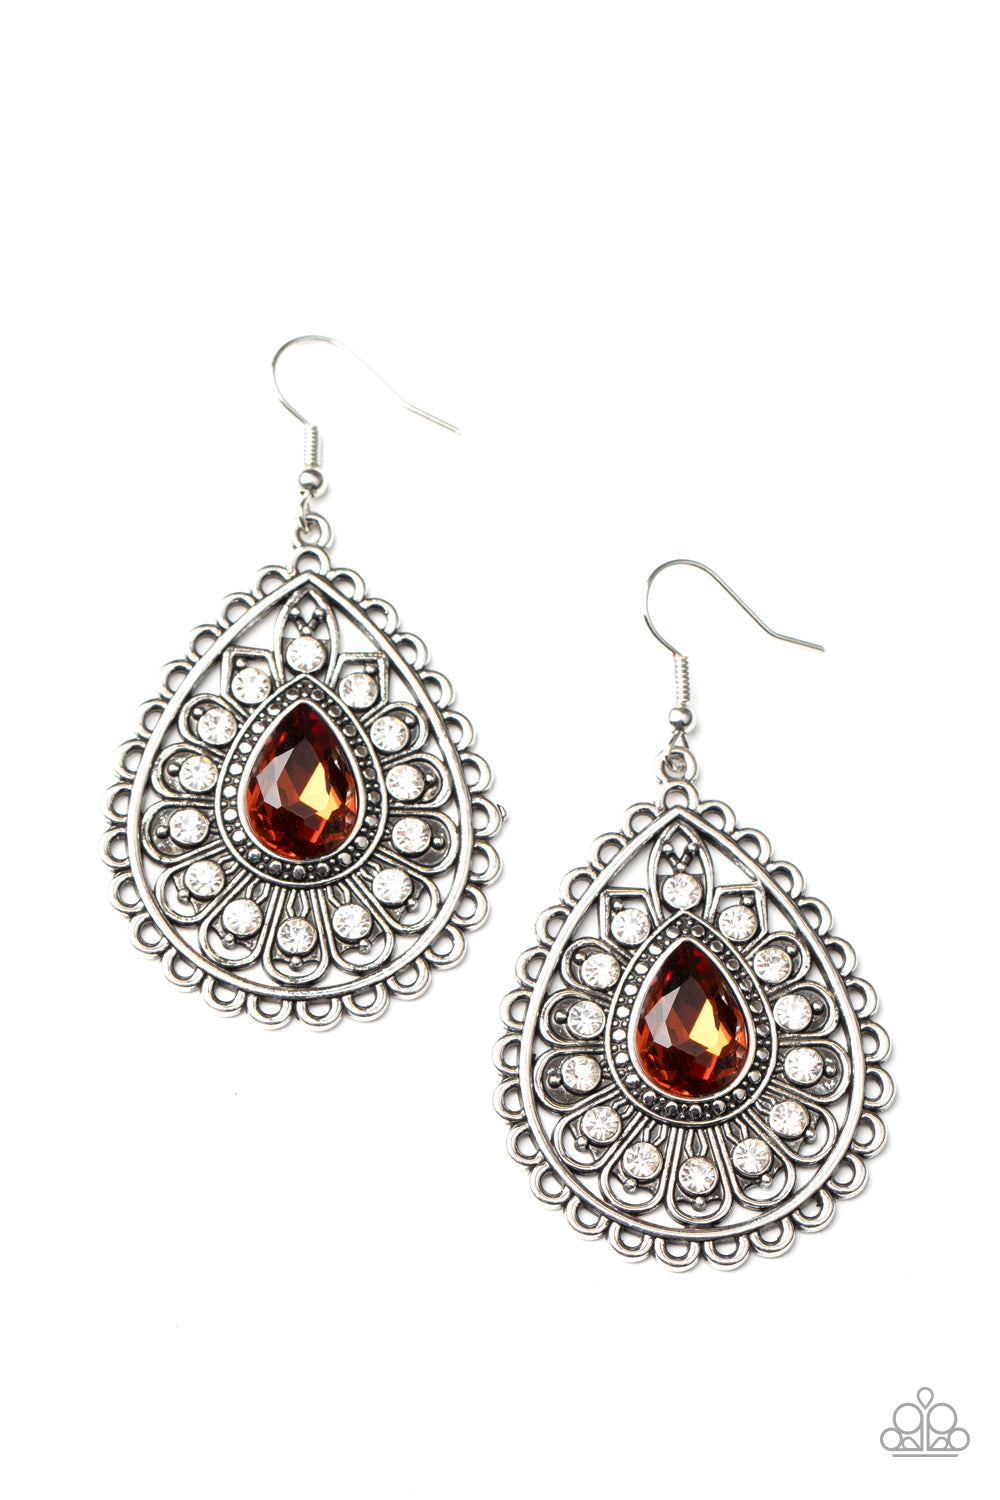 Eat, Drink, and BEAM Merry - Brown Topaz and Silver Earrings - Paparazzi Accessories - White rhinestone dotted silver petals flare out from a topaz teardrop rhinestone center, coalescing into a frilly frame. Earring attaches to a standard fishhook fitting. Sold as one pair of earrings.